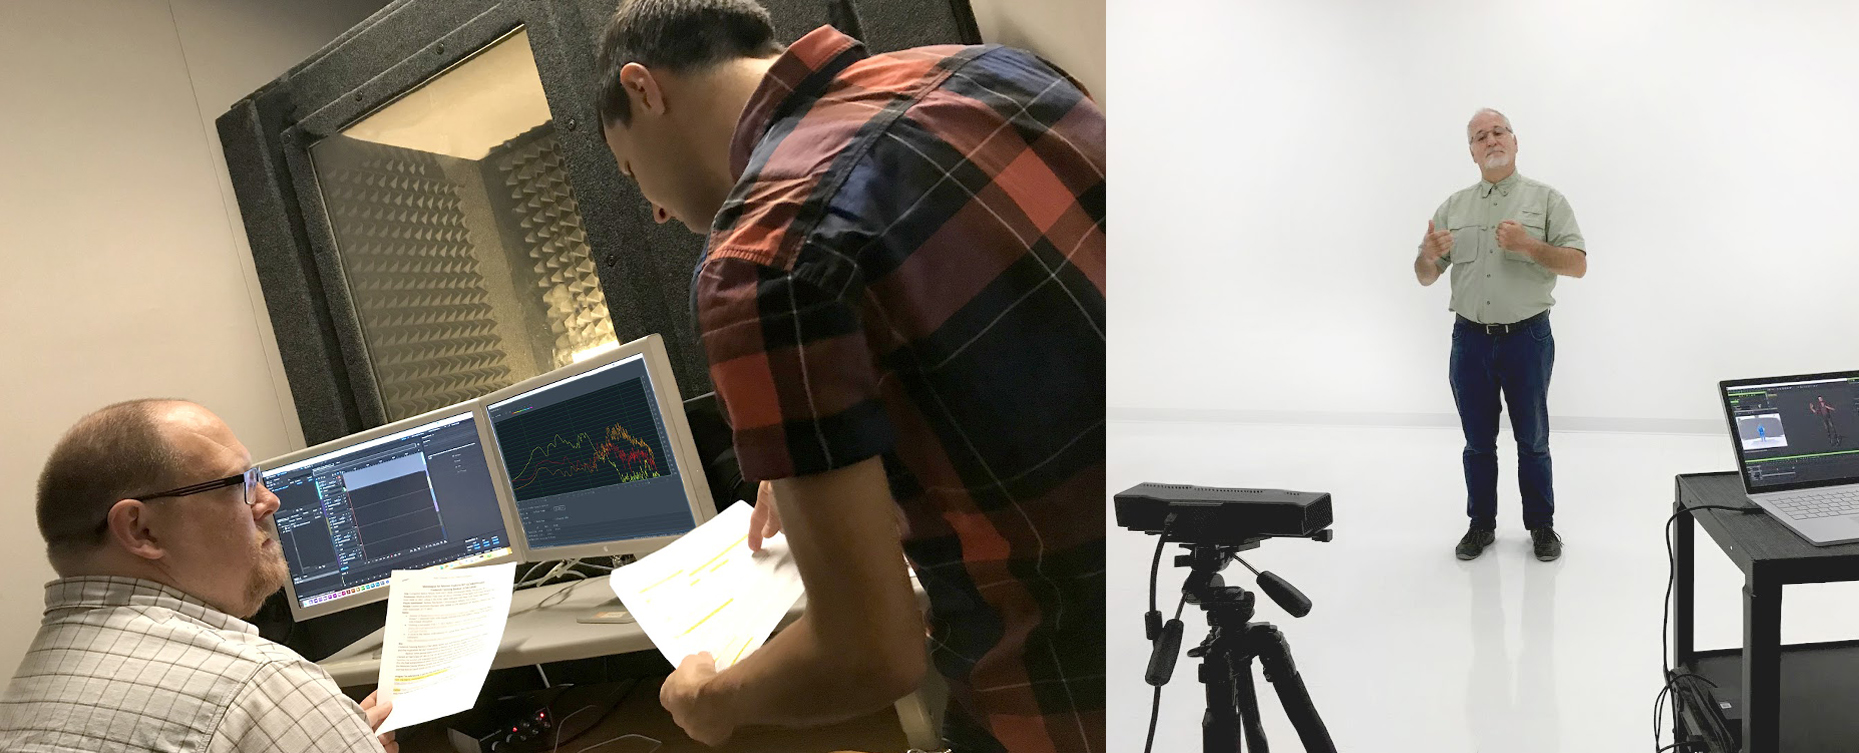 Left, Actor and audio technician reviewing script outside audio recroding booth. Right, Actor performing for motion capture system